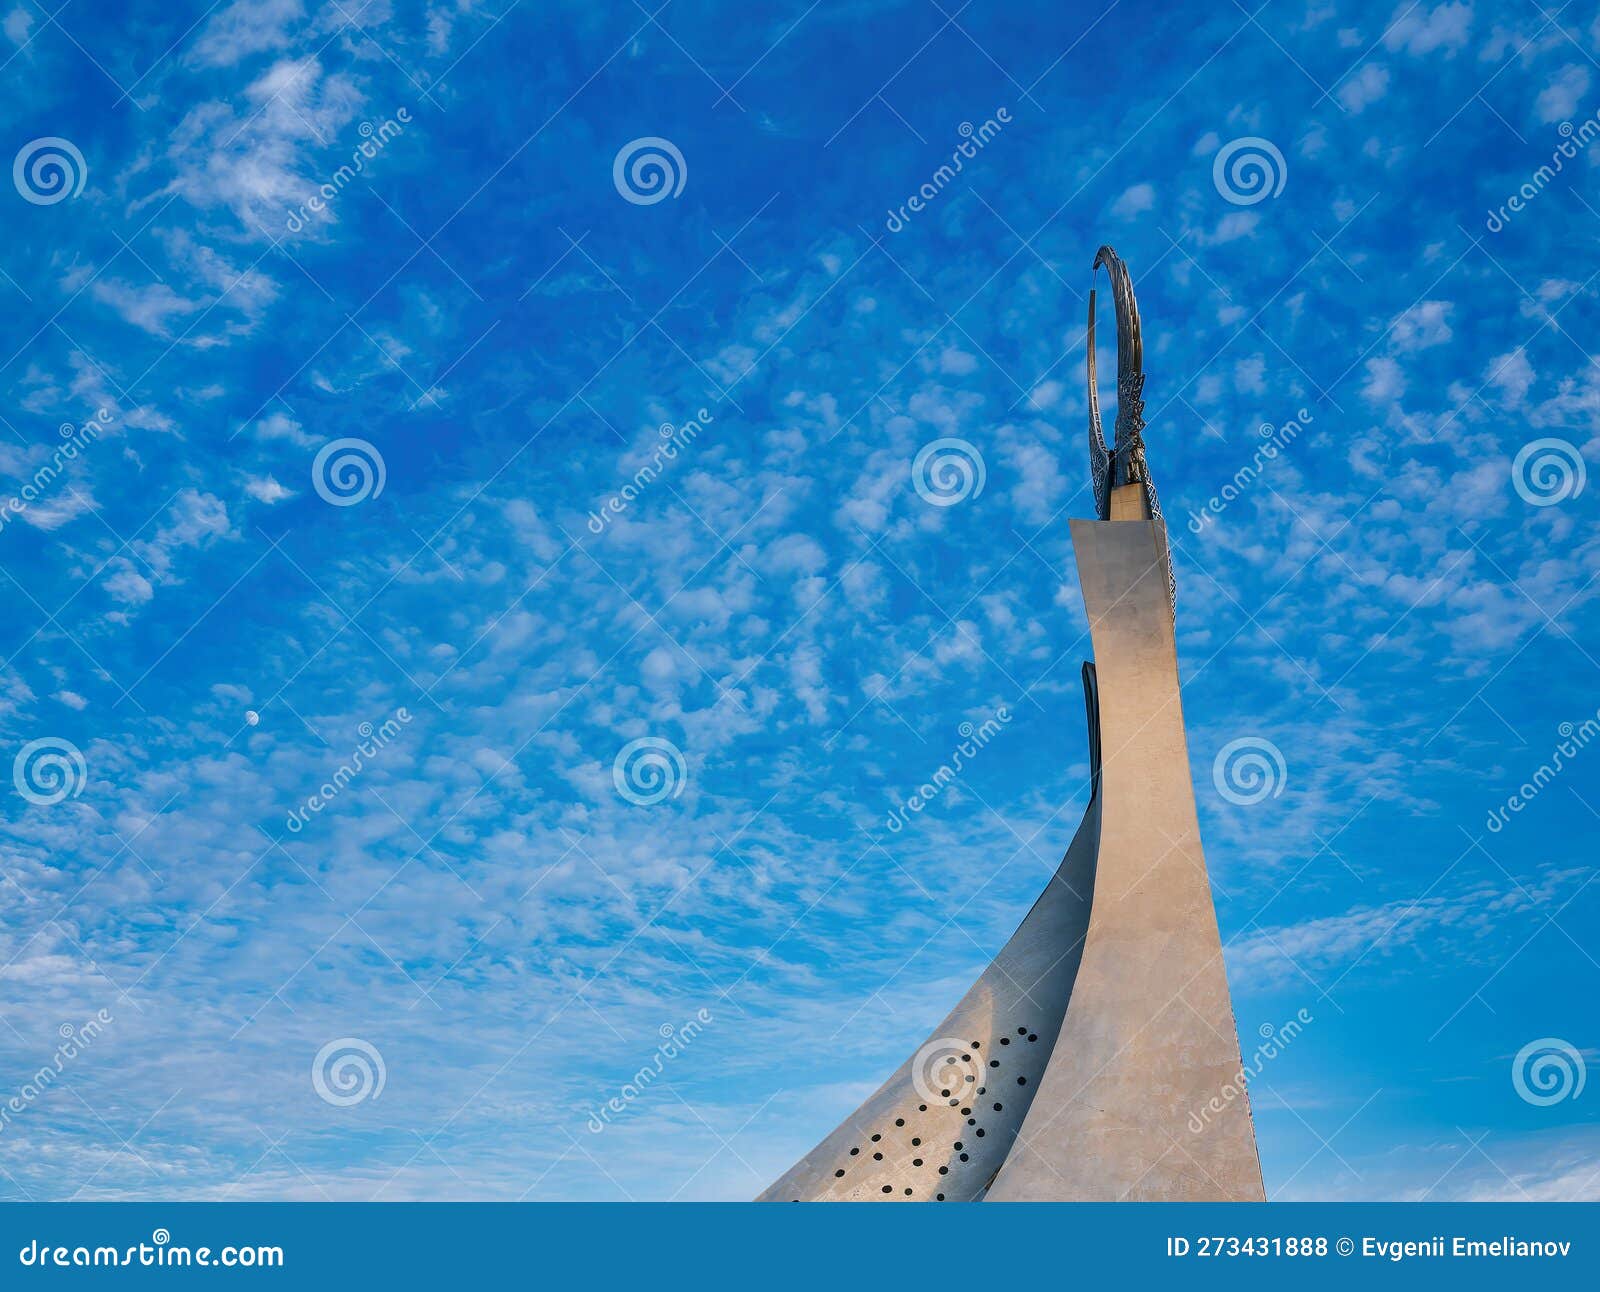 uzbekistan, tashkent - january 4, 2023: monument of independence in the form of a stele with a humo bird in the new